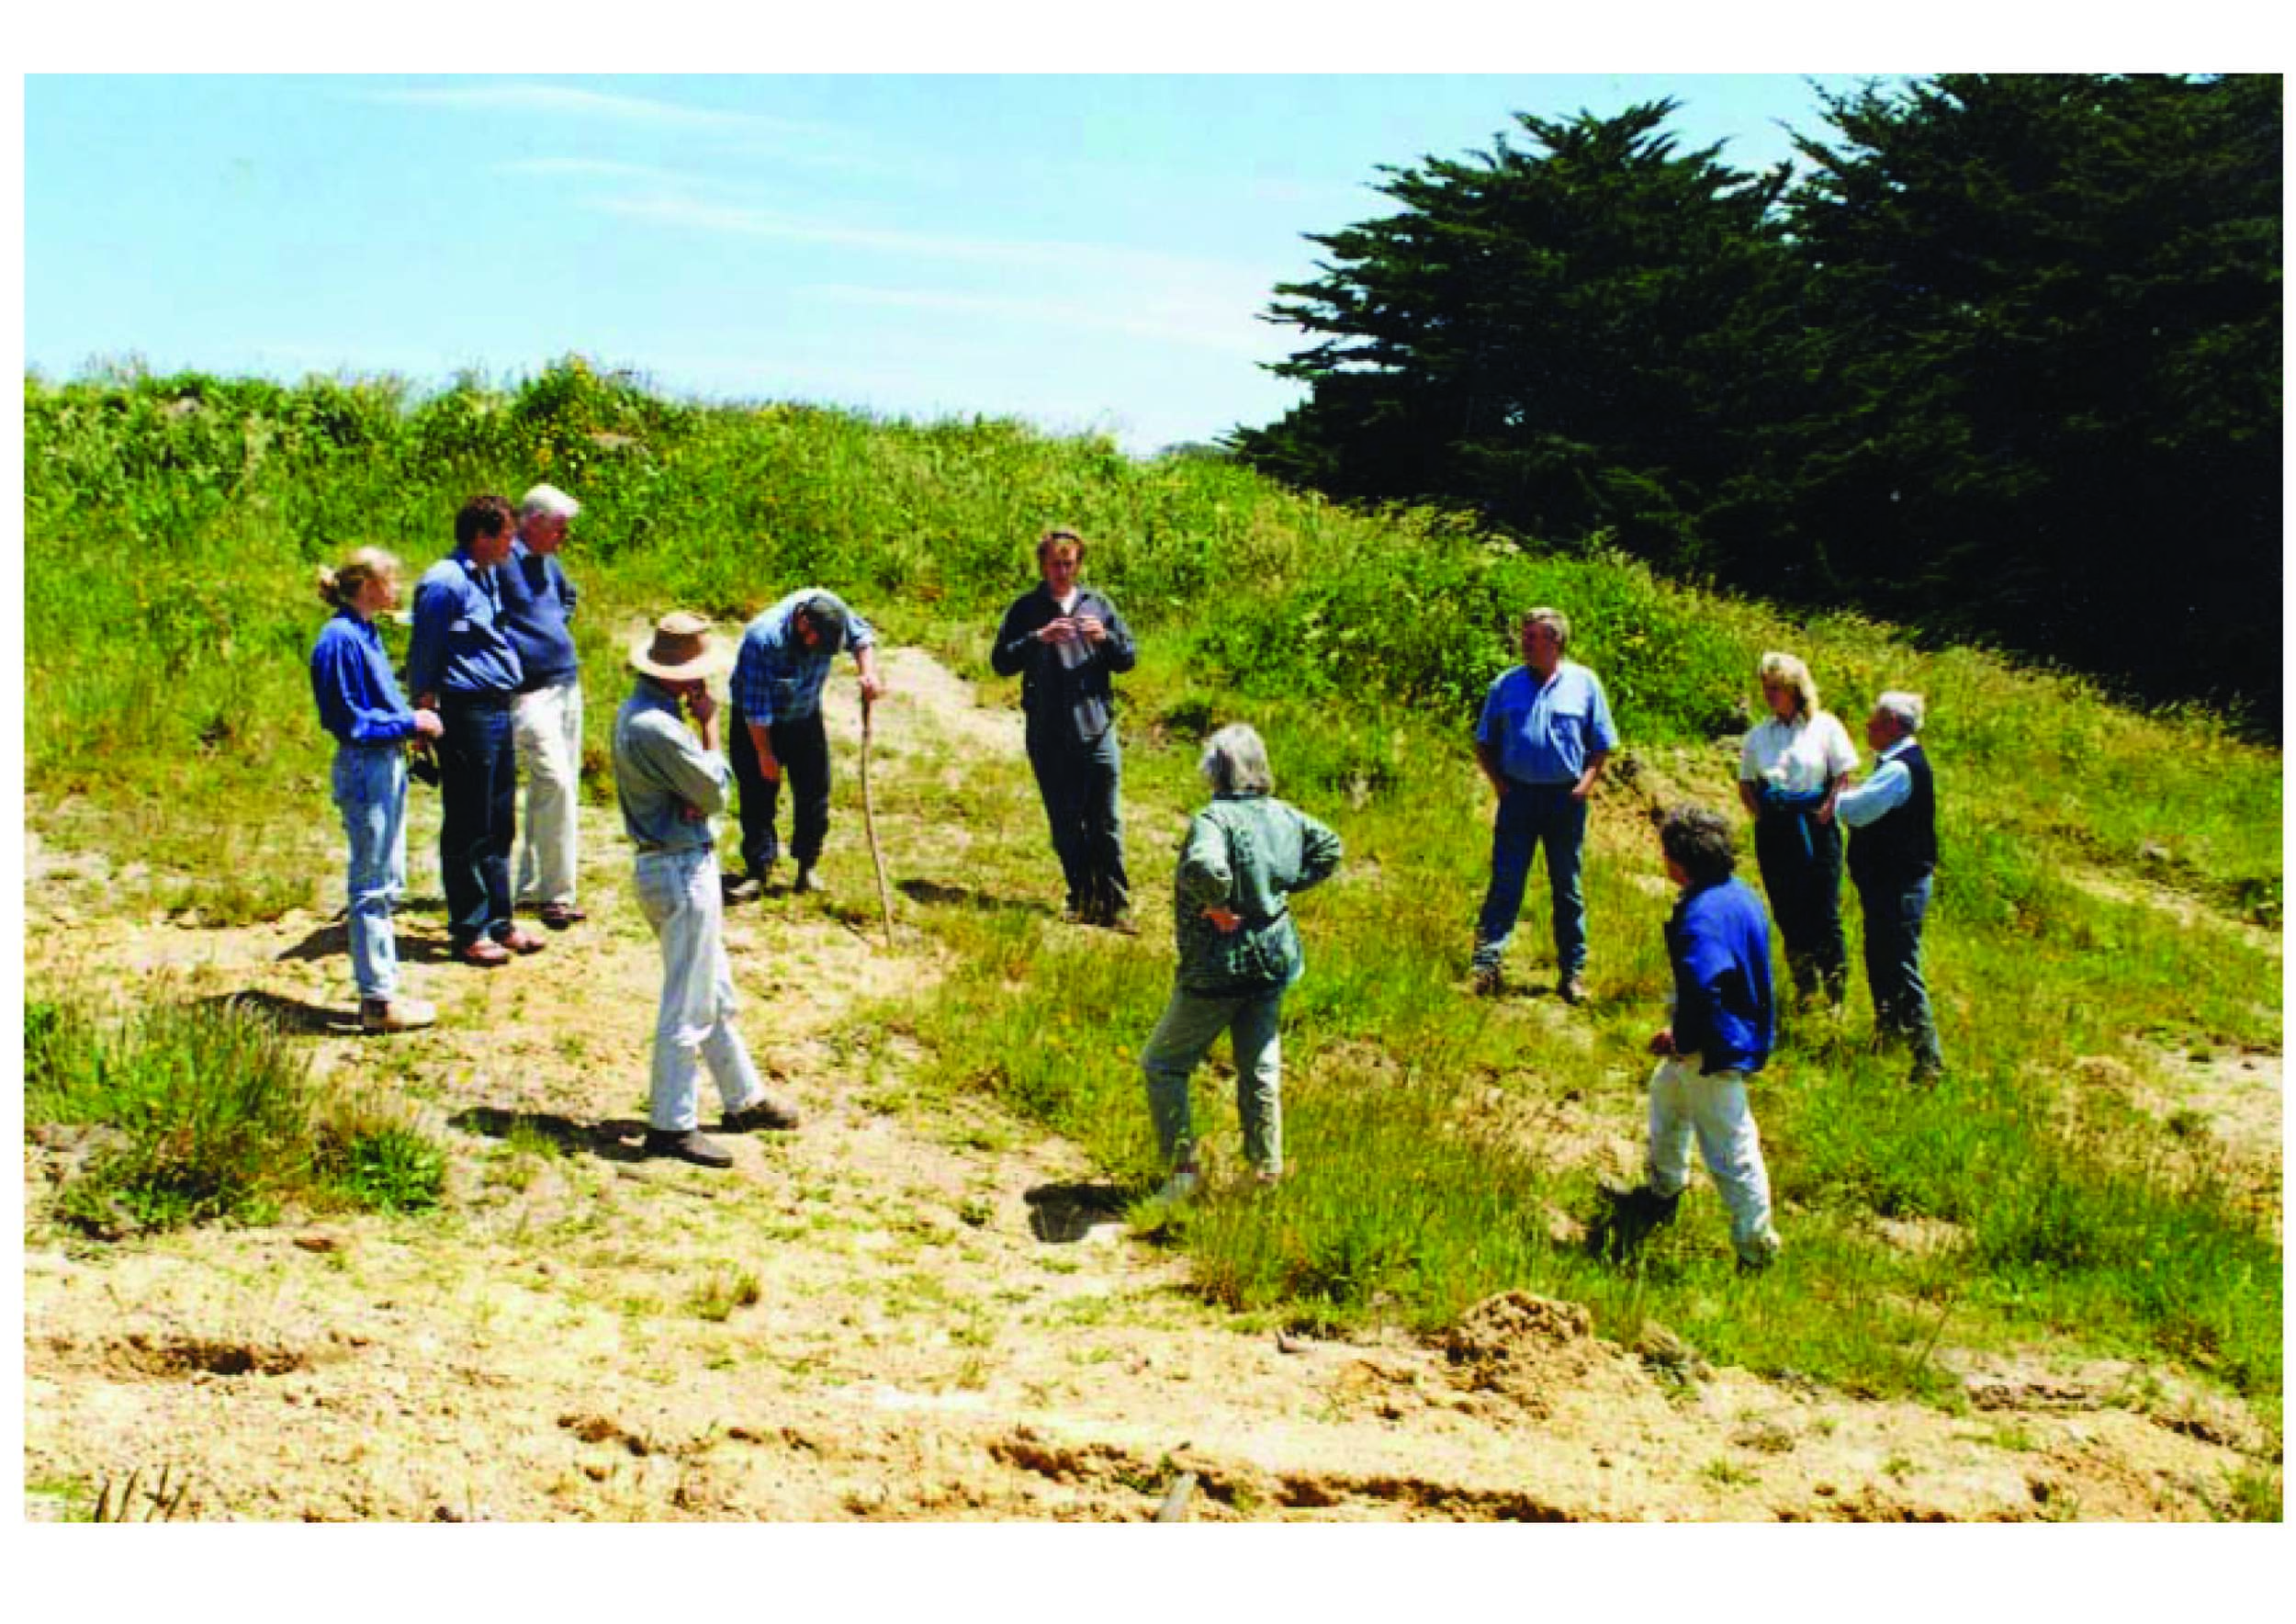 Southern Otway Catchment Management Plan, Landcare Field Inspection - Apollo Bay Area, Victoria